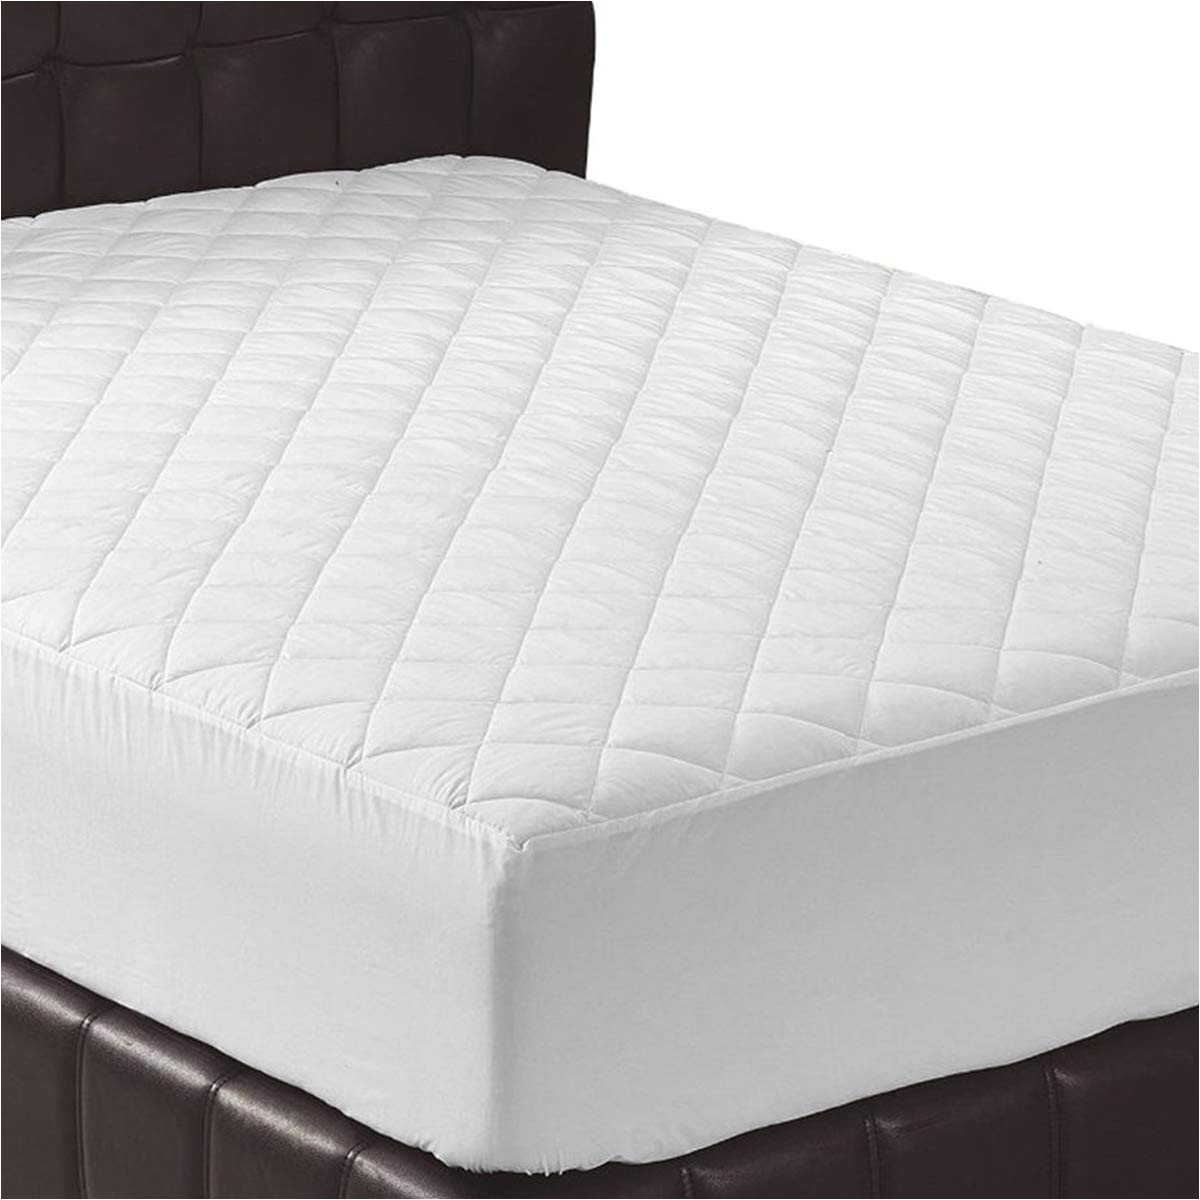 amazon com utopia bedding quilted fitted mattress pad full mattress cover stretches up to 16 inches deep mattress topper home kitchen